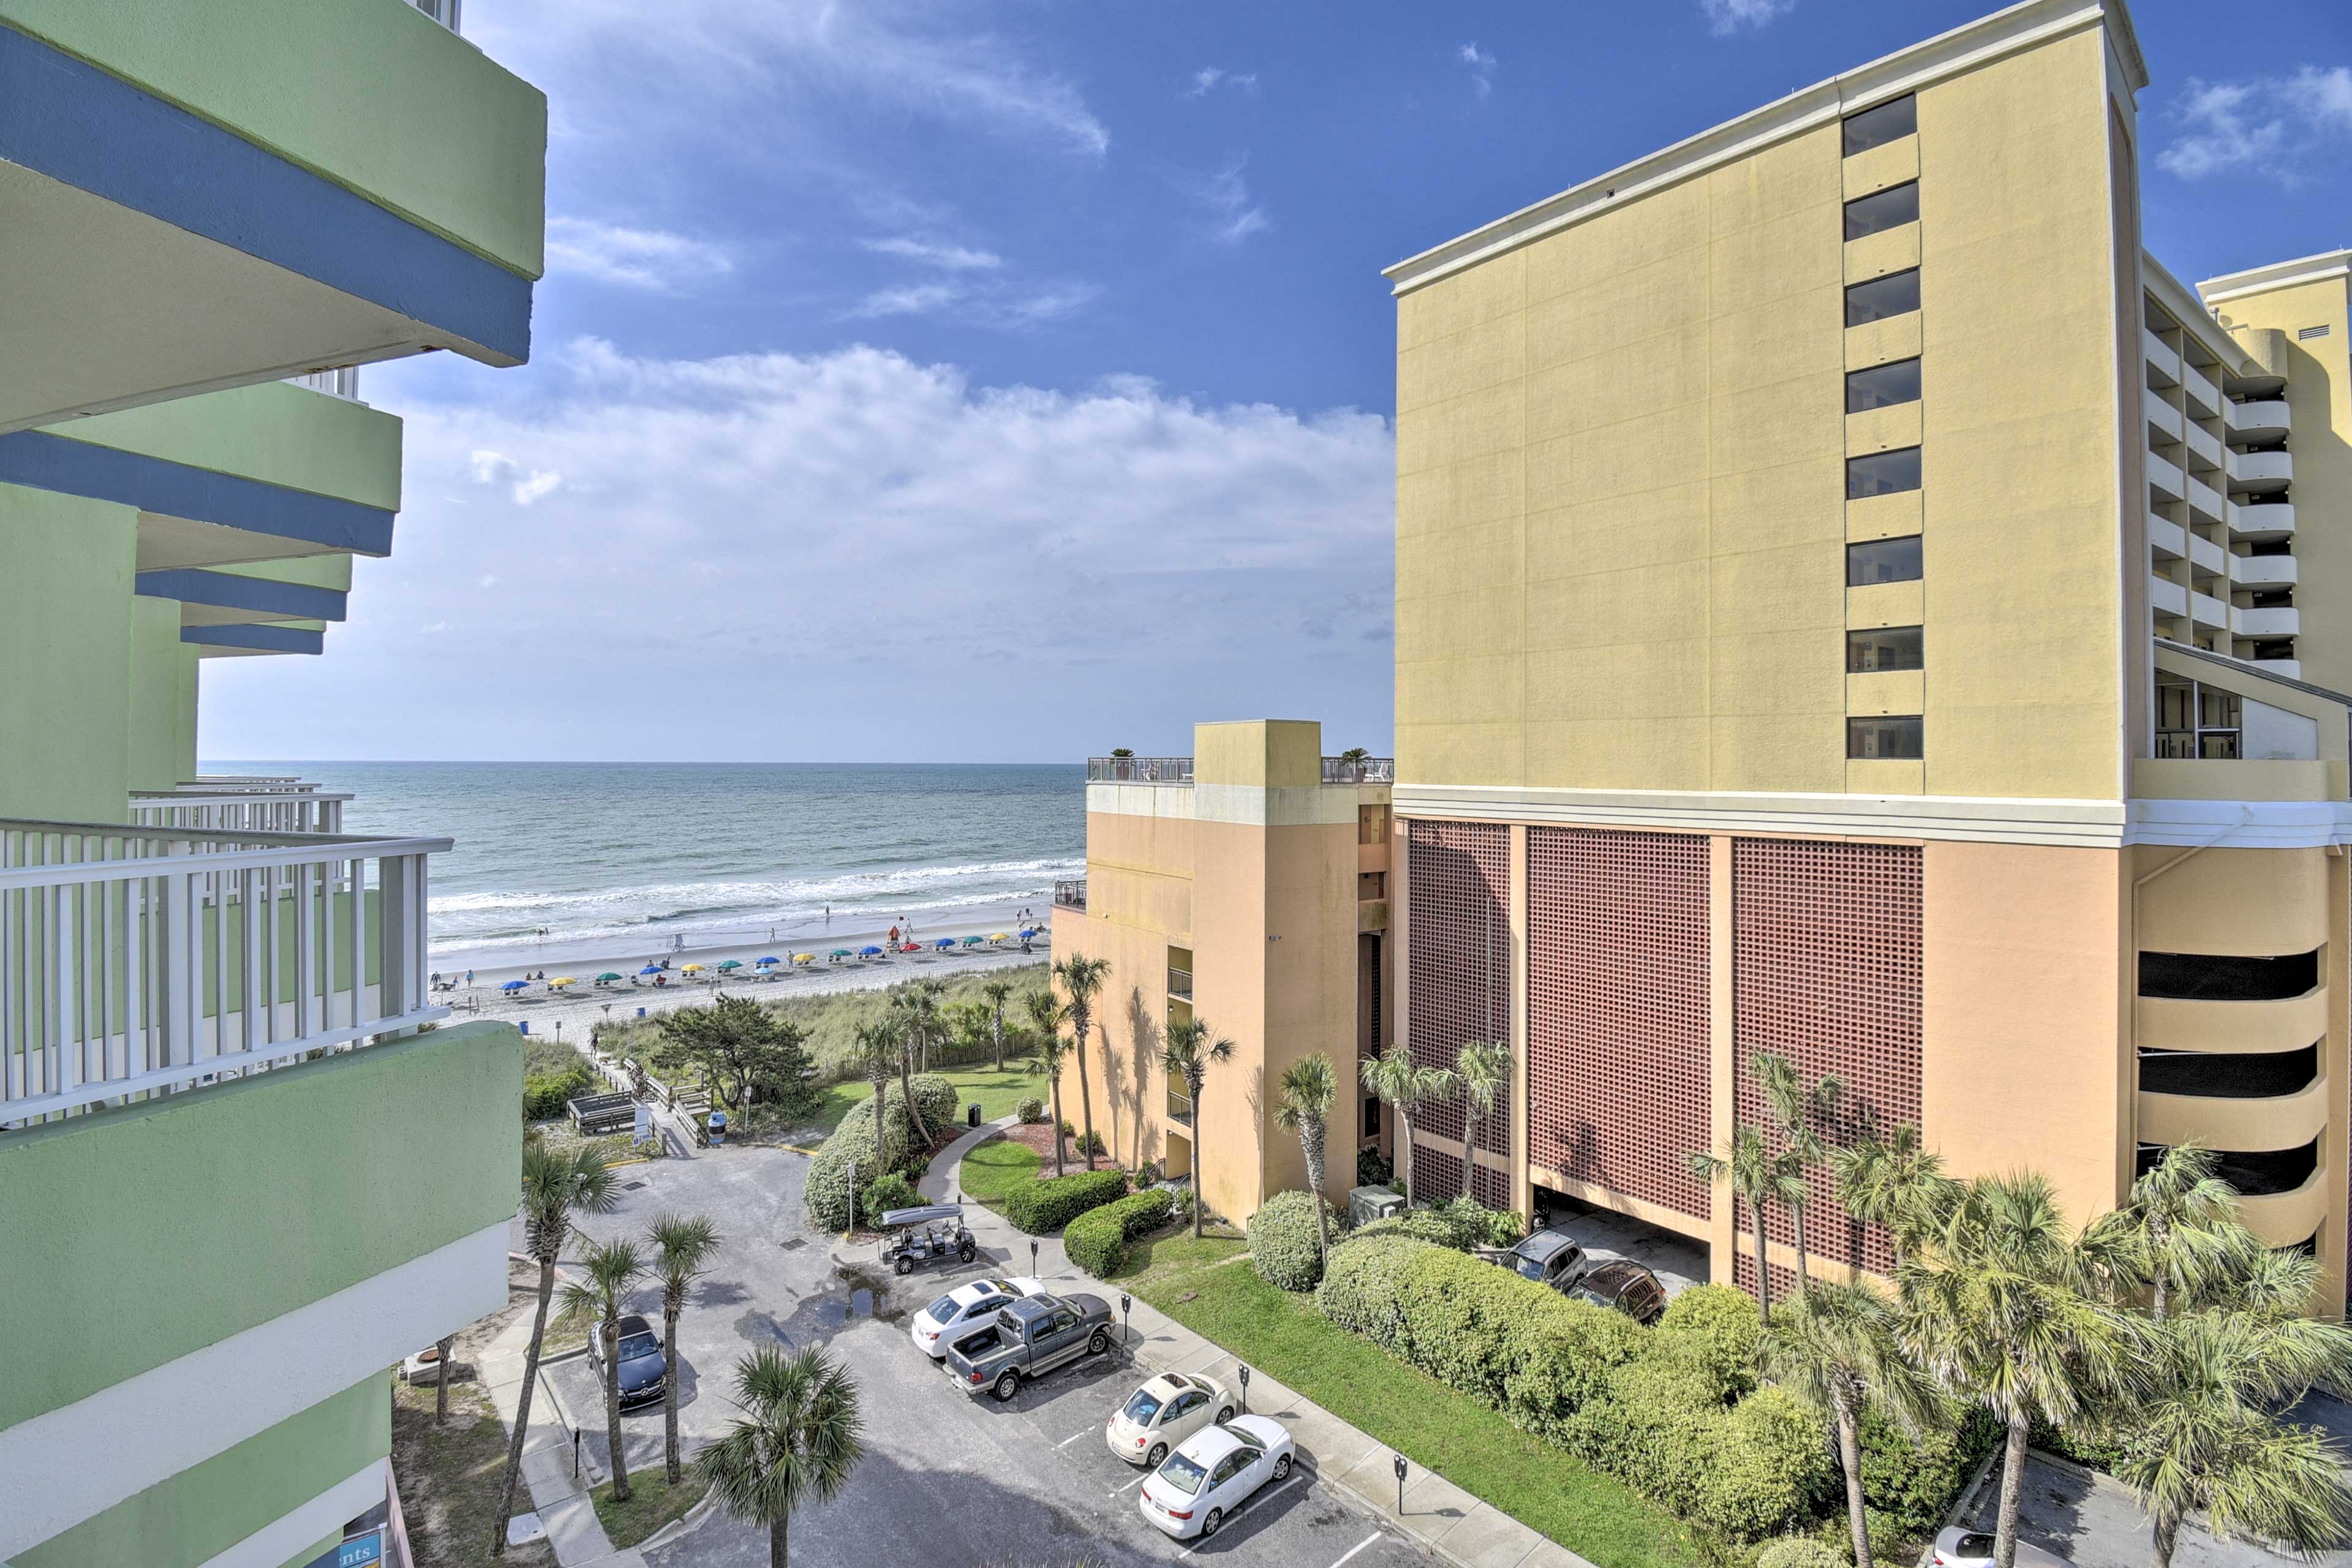 Myrtle Beach Vacation Rental | 1BR | 1BA | 550 Sq Ft | Step-Free Access